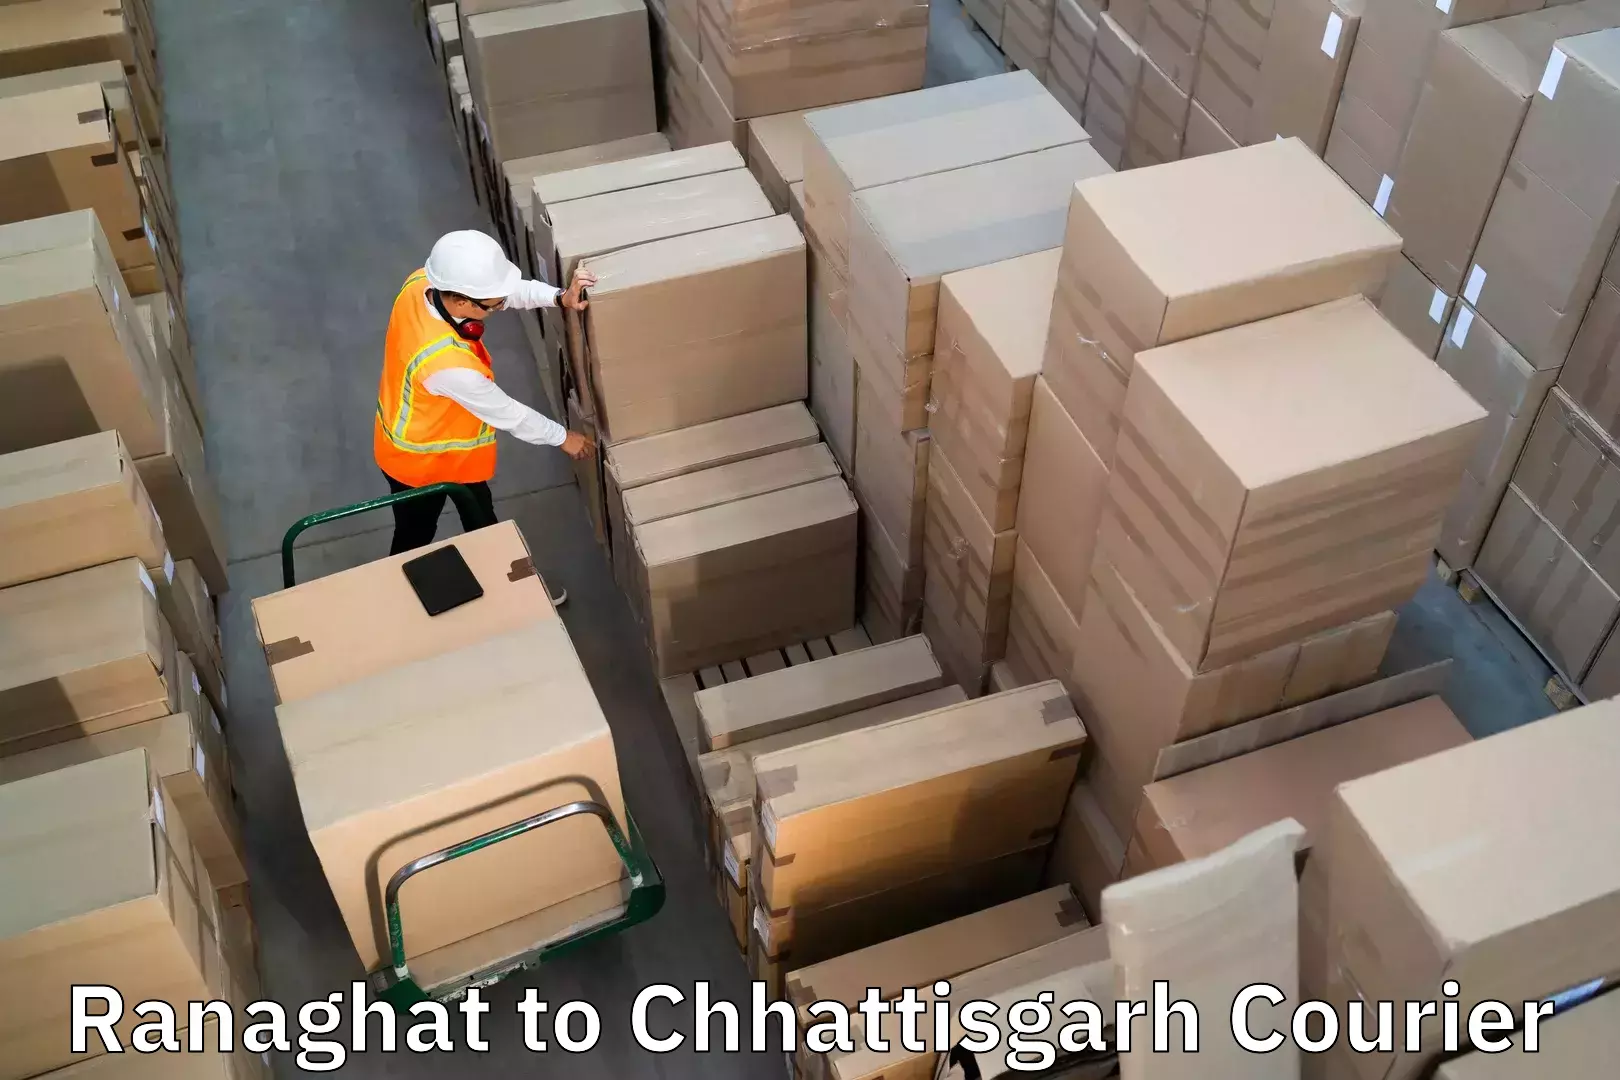 Express luggage delivery Ranaghat to Patna Chhattisgarh